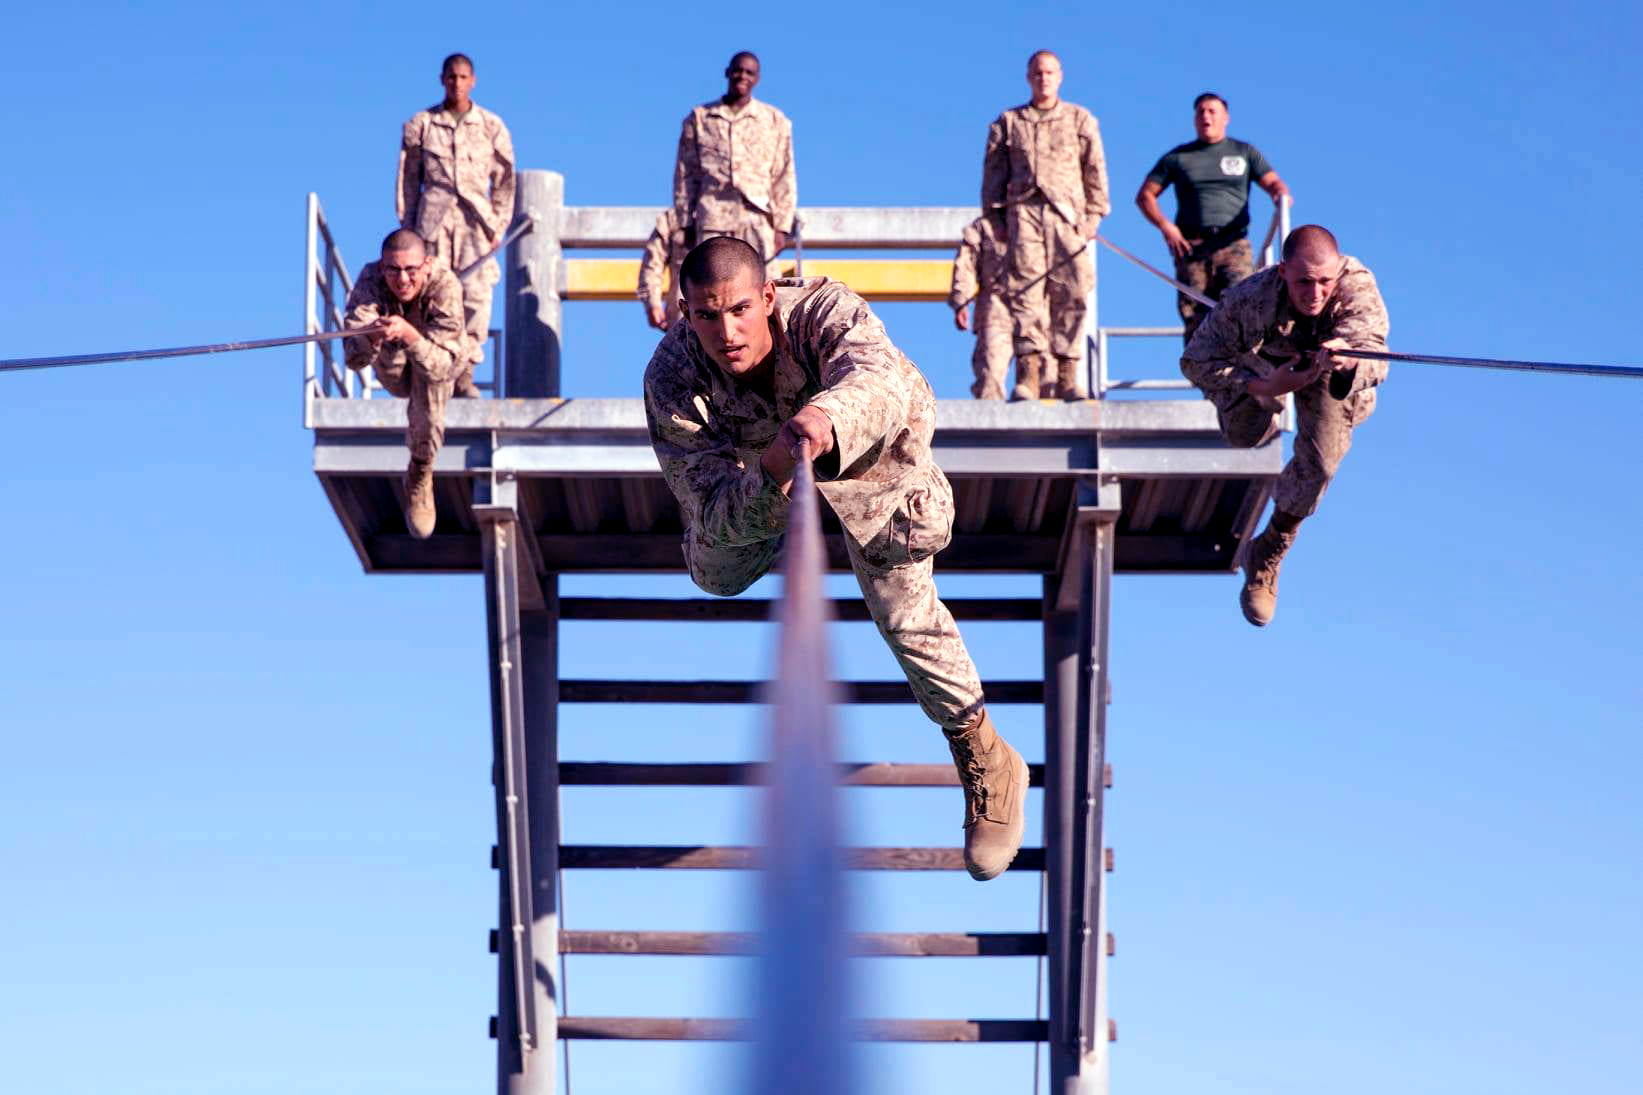 Rct. Eliseo Z. Sandoval with Bravo Company, 1st Recruit Training Battalion, overcomes an obstacle during the Confidence Course at Marine Corps Recruit Depot, San Diego, Dec. 2, 2020.